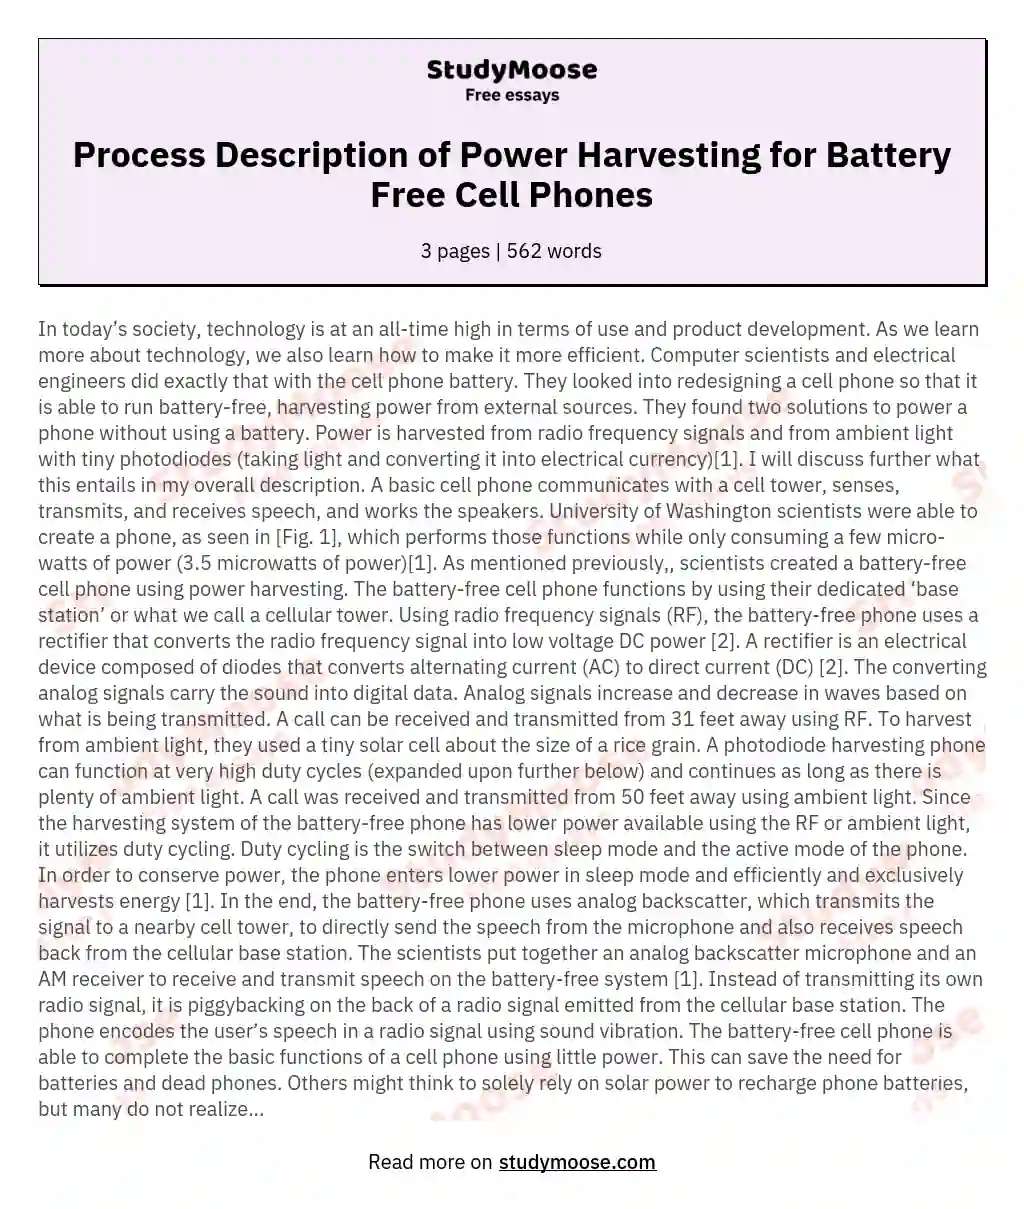 Process Description of Power Harvesting for Battery Free Cell Phones essay